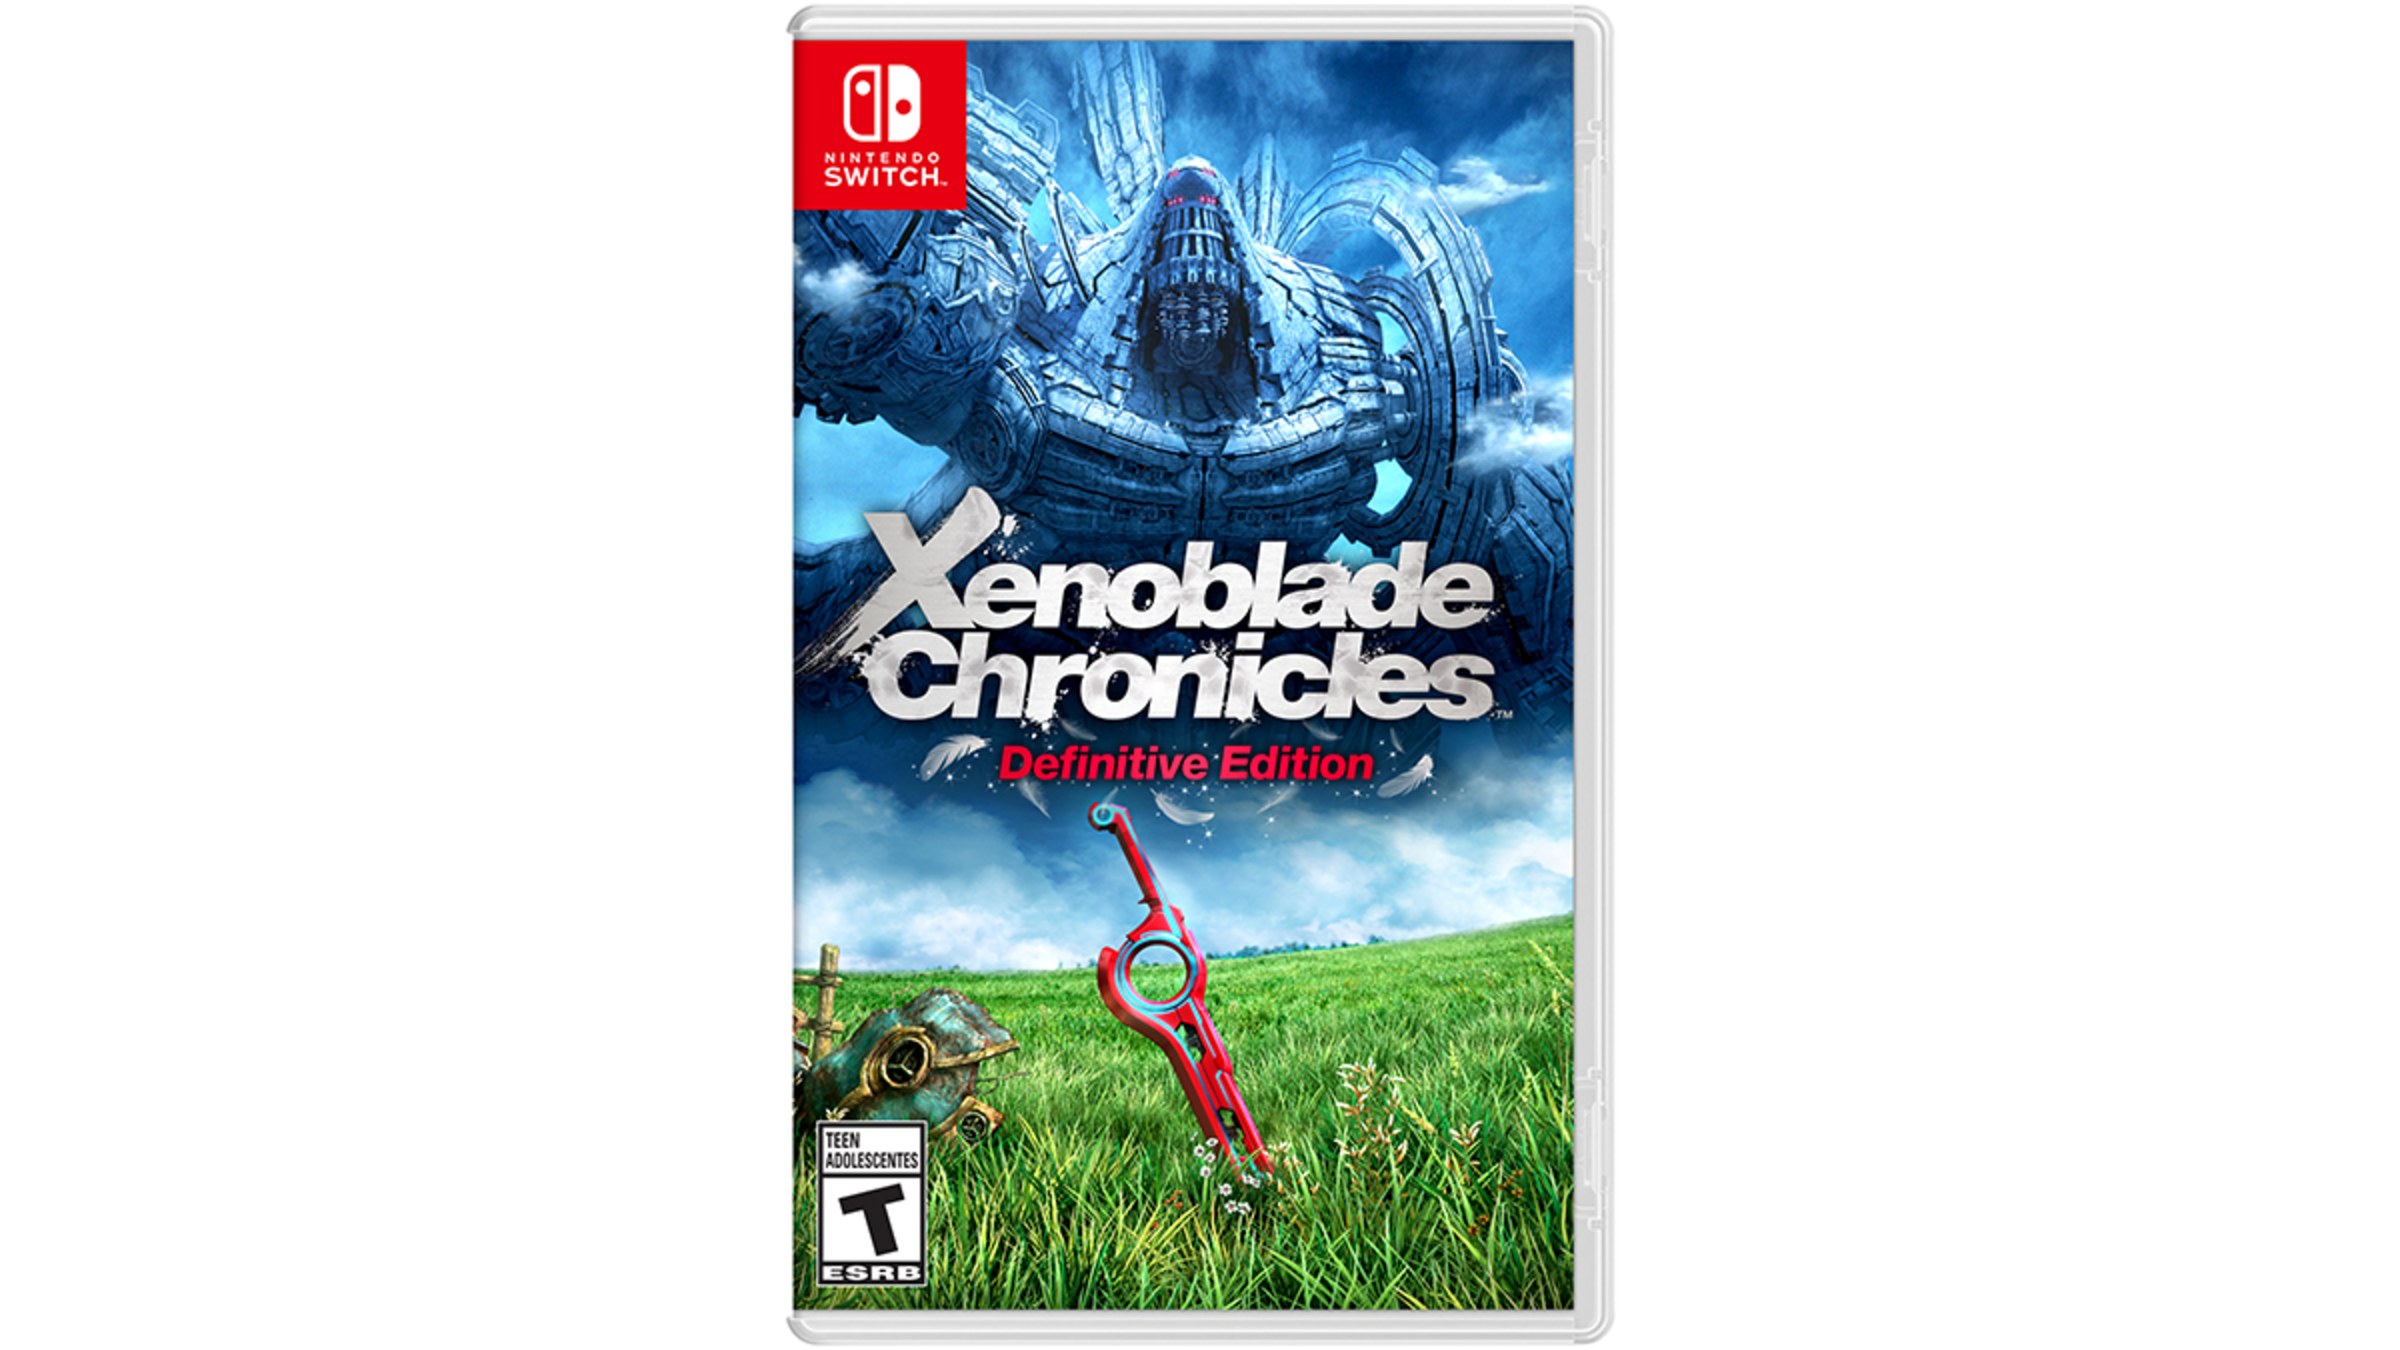 Xenoblade Chronicles™ Definitive Official - Nintendo Switch Nintendo Site Edition for